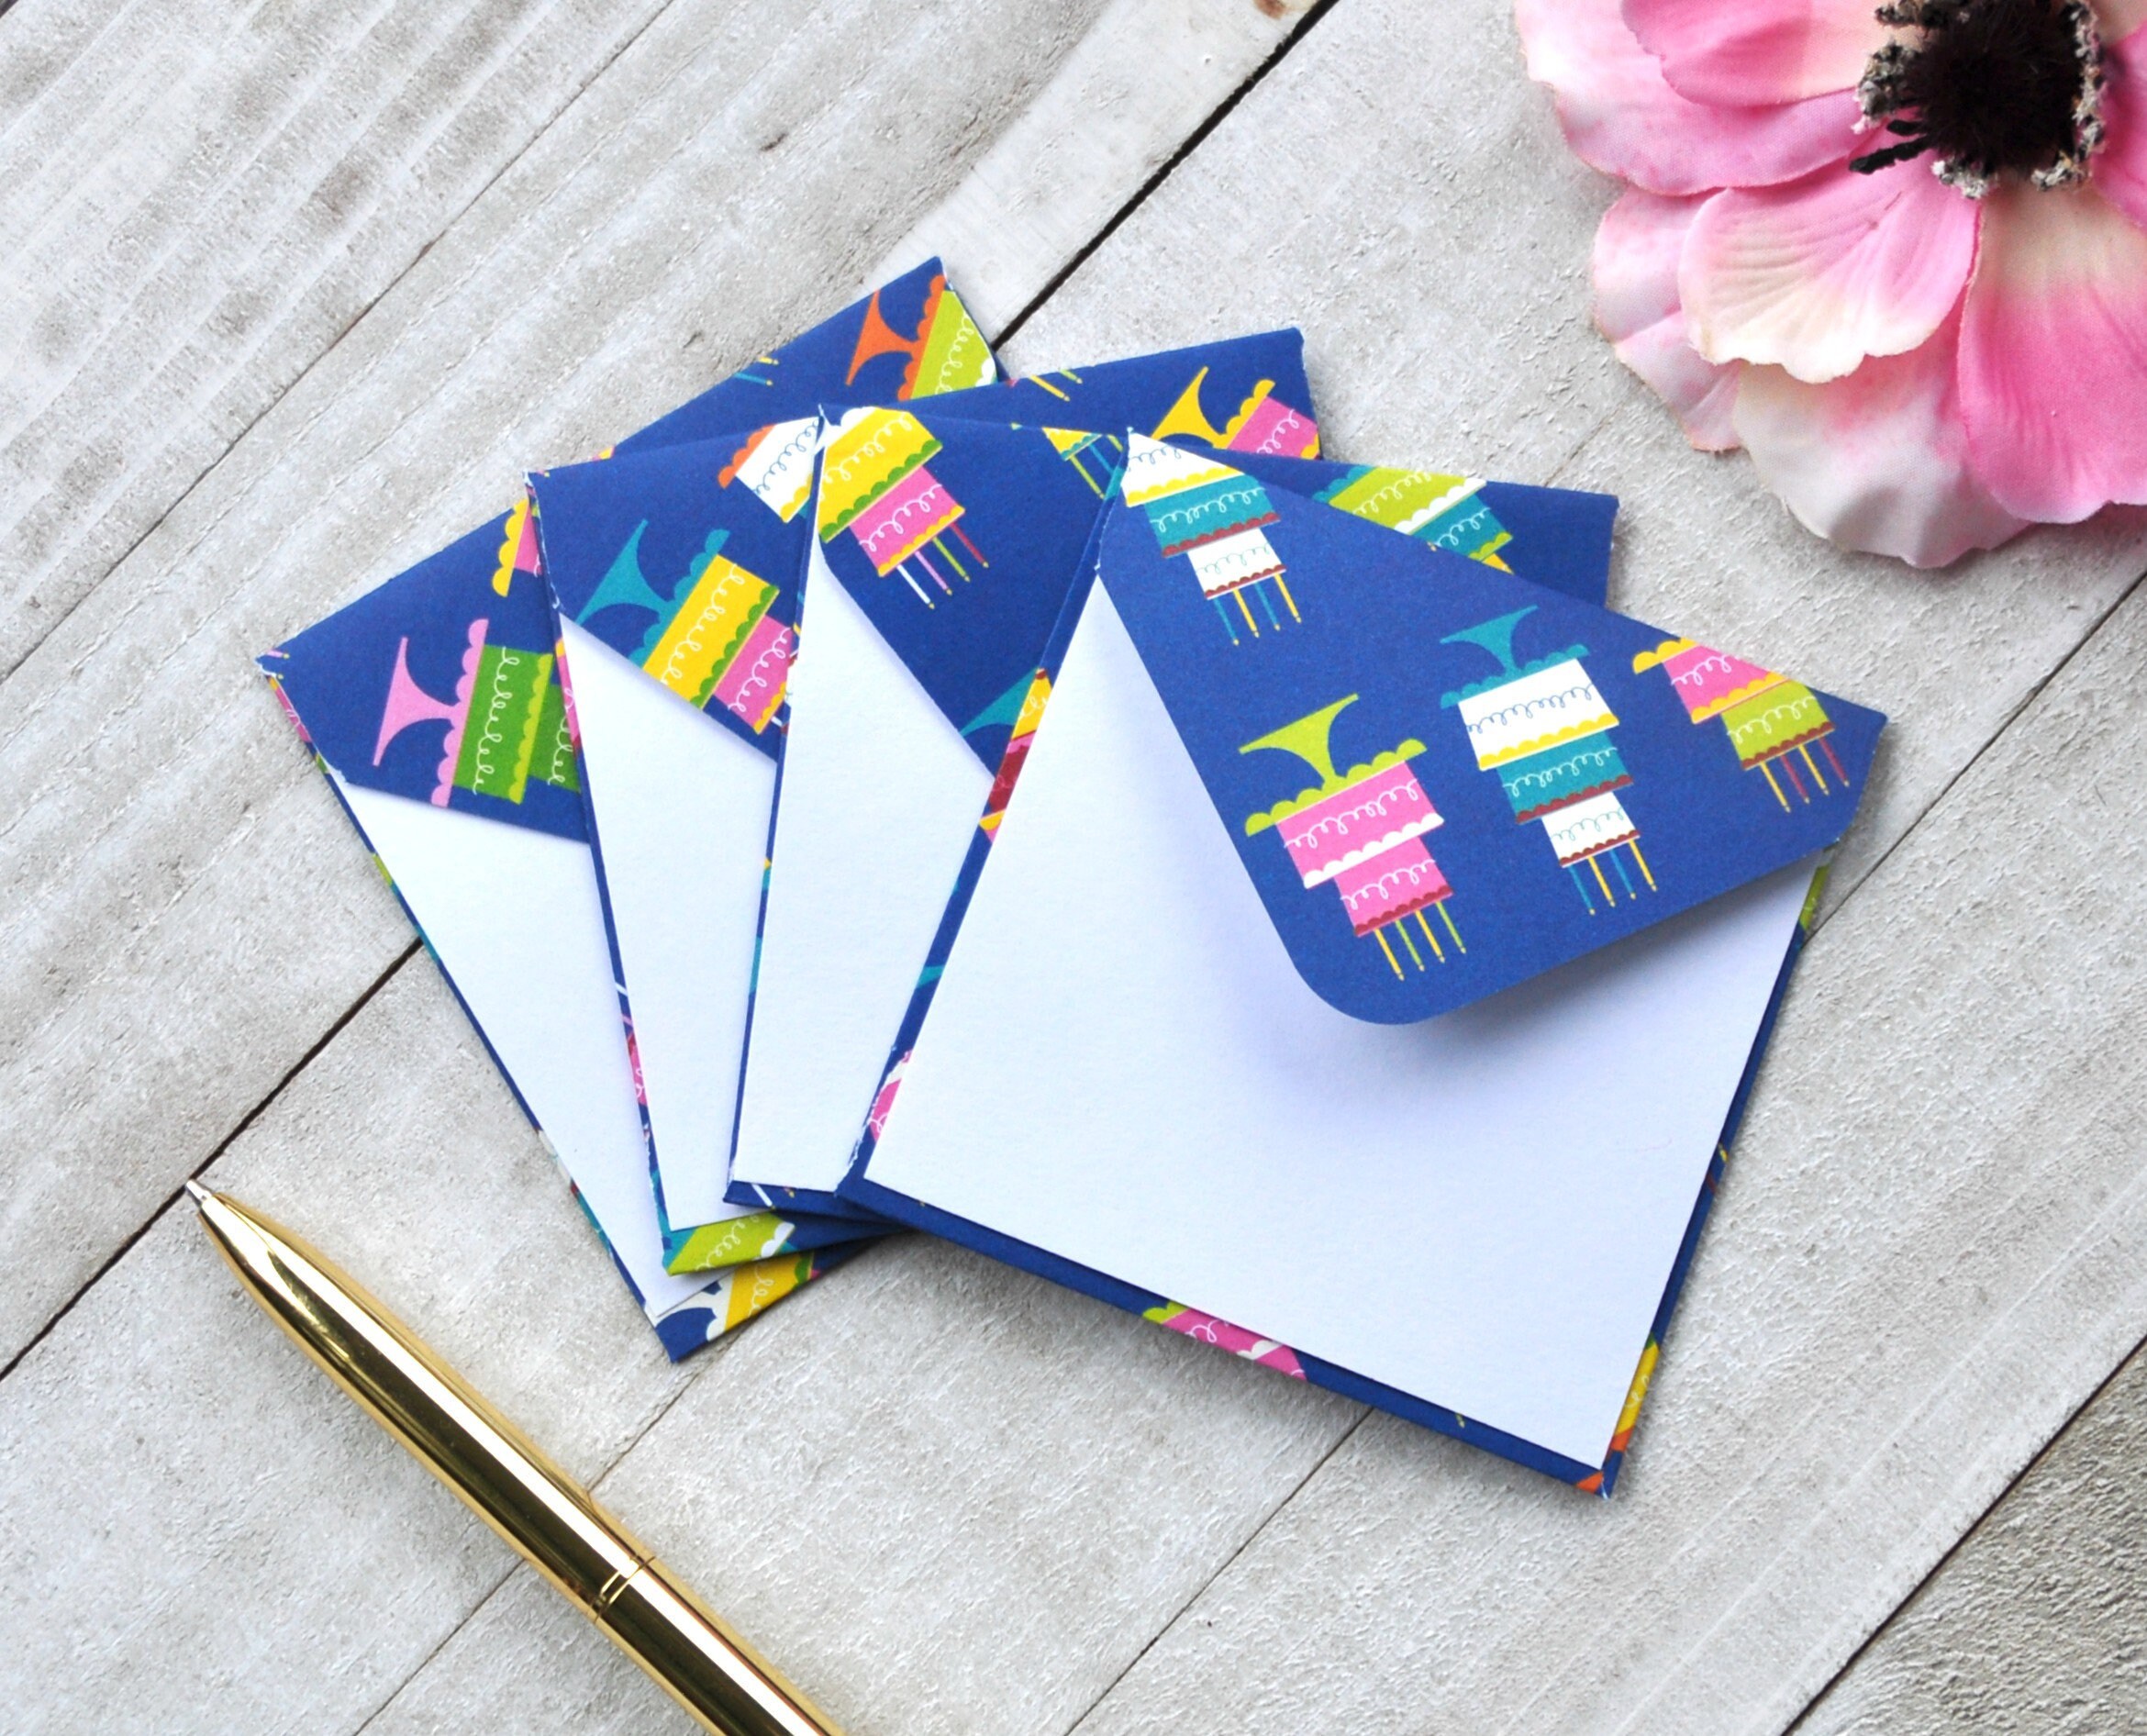 Floral Mini Note Cards, Bulk Mini Note Cards, Assorted Floral Mini Notecards,  Set of 25 or 100, 3 X 3 Cards. Not Suitable for Mailing. 